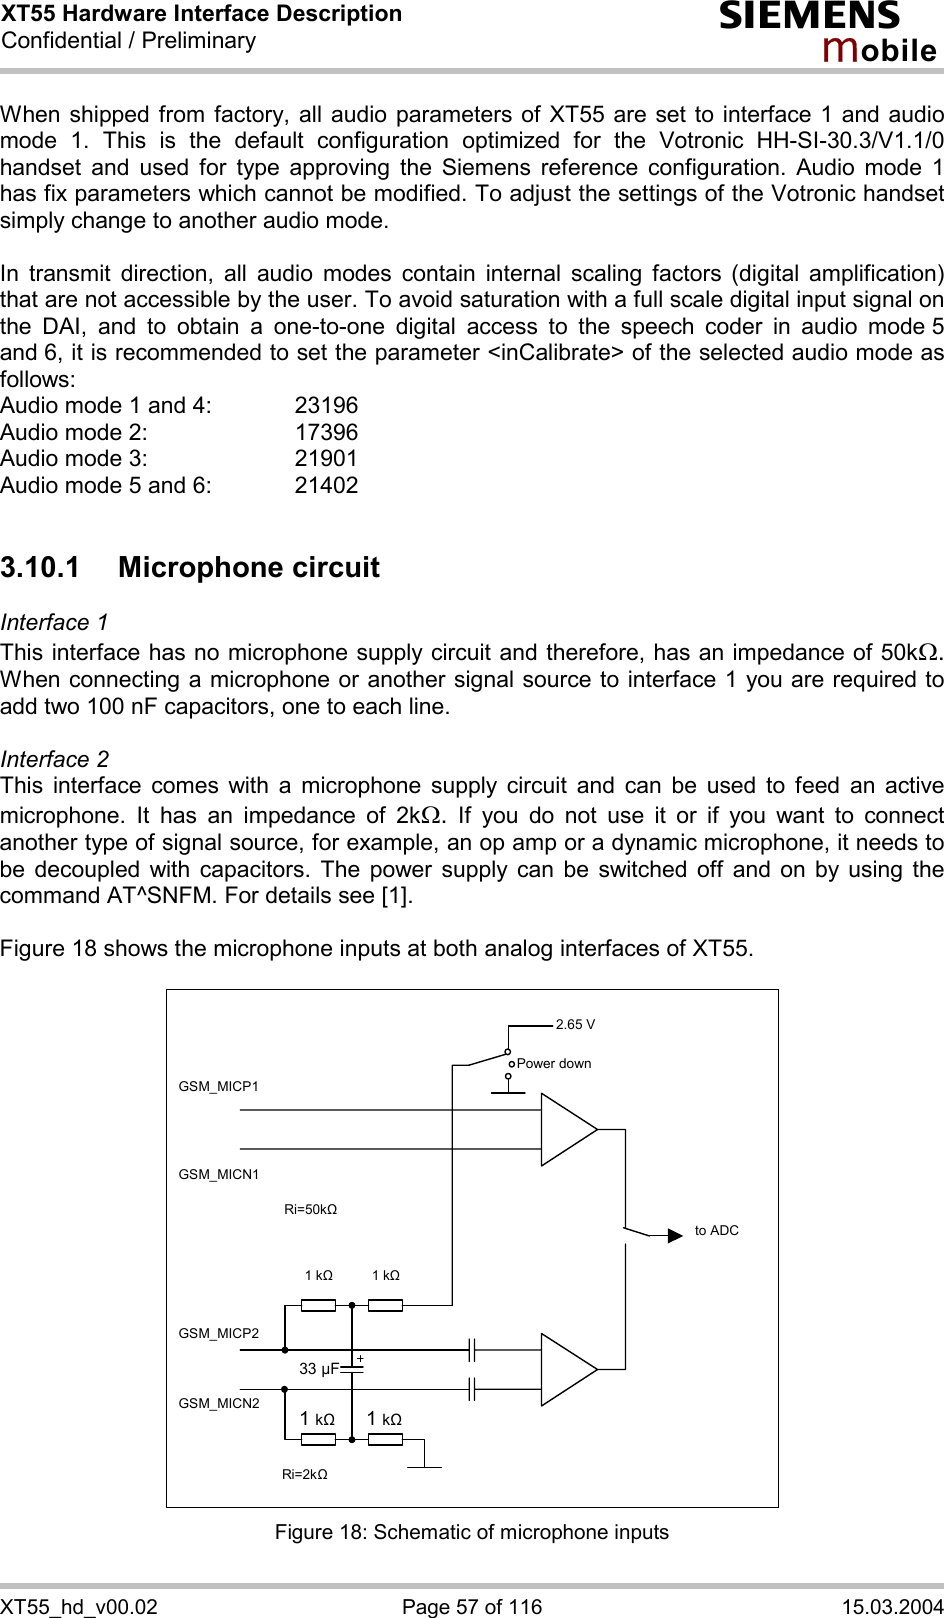 XT55 Hardware Interface Description Confidential / Preliminary s mo b i l e XT55_hd_v00.02  Page 57 of 116  15.03.2004 When shipped from factory, all audio parameters of XT55 are set to interface 1 and audio mode 1. This is the default configuration optimized for the Votronic HH-SI-30.3/V1.1/0 handset and used for type approving the Siemens reference configuration. Audio mode 1 has fix parameters which cannot be modified. To adjust the settings of the Votronic handset simply change to another audio mode.  In transmit direction, all audio modes contain internal scaling factors (digital amplification) that are not accessible by the user. To avoid saturation with a full scale digital input signal on the DAI, and to obtain a one-to-one digital access to the speech coder in audio mode 5 and 6, it is recommended to set the parameter &lt;inCalibrate&gt; of the selected audio mode as follows: Audio mode 1 and 4:    23196 Audio mode 2:     17396 Audio mode 3:    21901 Audio mode 5 and 6:    21402  3.10.1 Microphone circuit Interface 1  This interface has no microphone supply circuit and therefore, has an impedance of 50kW. When connecting a microphone or another signal source to interface 1 you are required to add two 100 nF capacitors, one to each line.   Interface 2 This interface comes with a microphone supply circuit and can be used to feed an active microphone. It has an impedance of 2kW. If you do not use it or if you want to connect another type of signal source, for example, an op amp or a dynamic microphone, it needs to be decoupled with capacitors. The power supply can be switched off and on by using the command AT^SNFM. For details see [1].  Figure 18 shows the microphone inputs at both analog interfaces of XT55.    2.65 V to ADC Power down GSM_MICP1 GSM_MICN1 GSM_MICP2 GSM_MICN2 1 k&quot;   1 k&quot; 1 k&quot; 1 k&quot;33 µF Ri=50k&quot; Ri=2k&quot;  Figure 18: Schematic of microphone inputs 